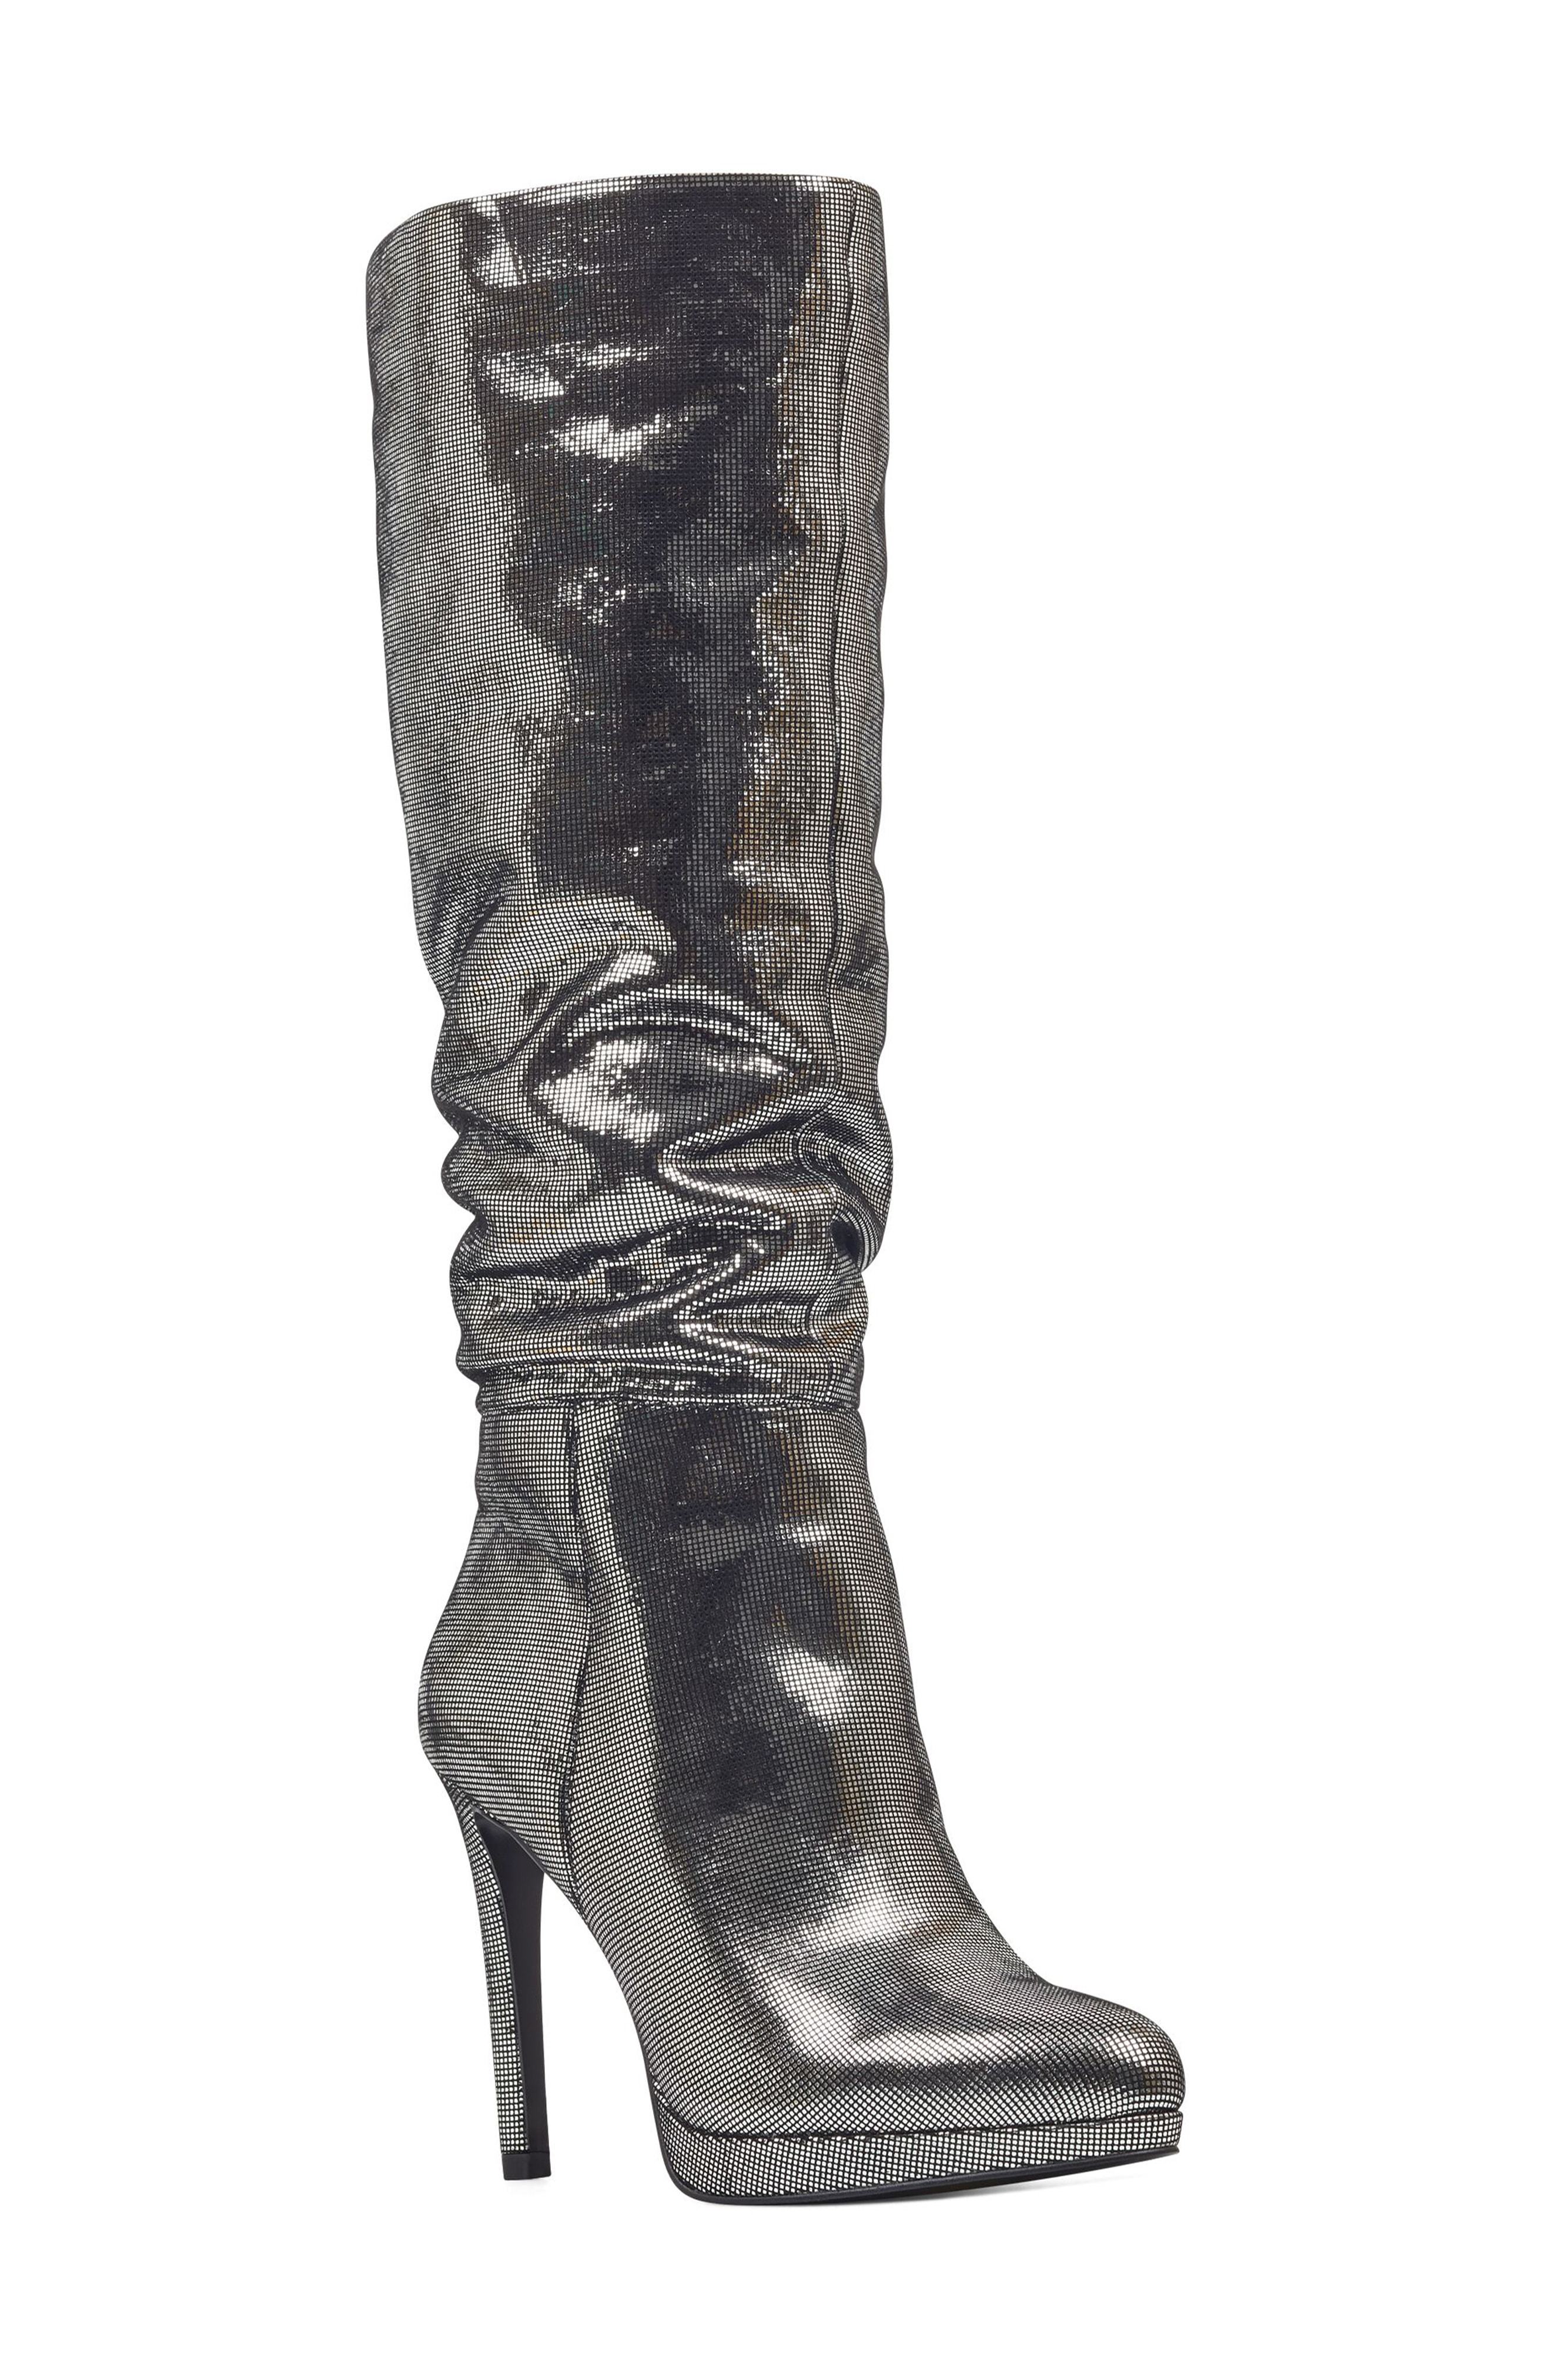 silver boots nordstrom